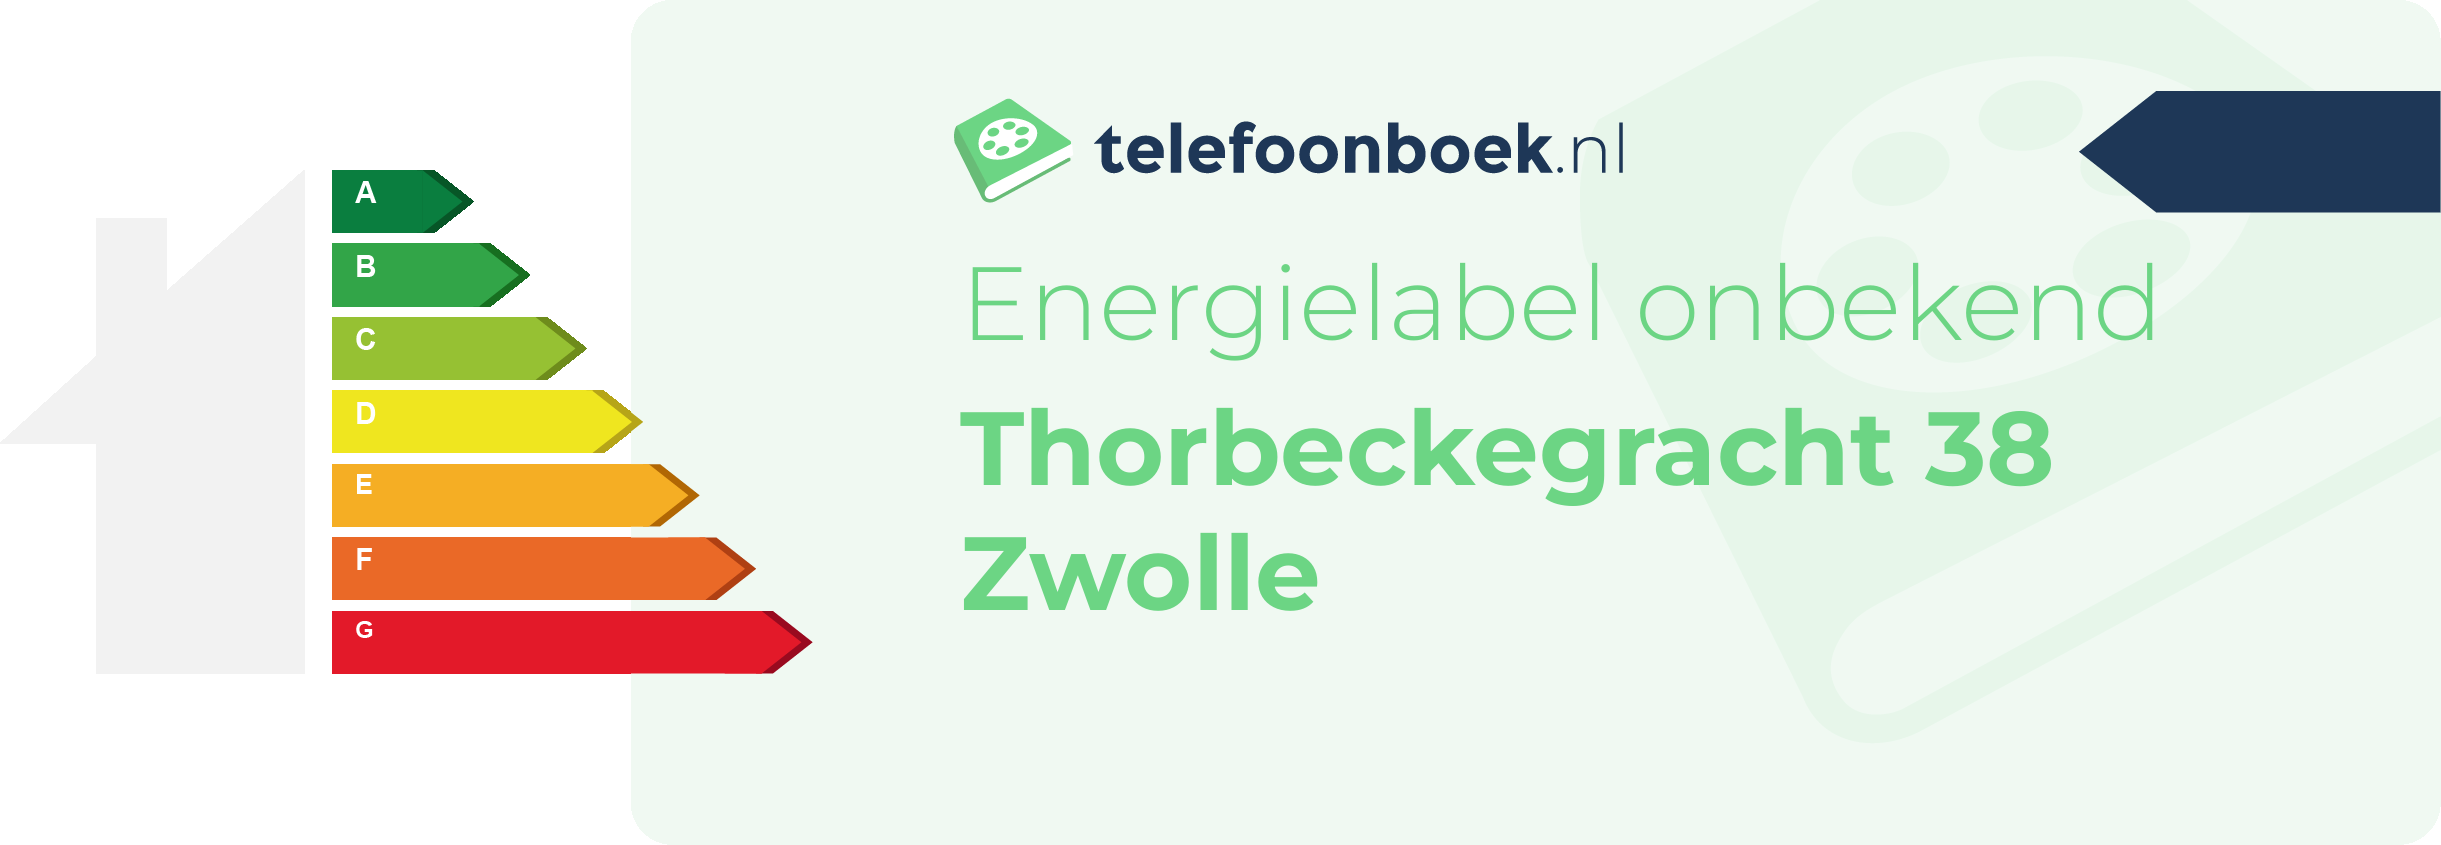 Energielabel Thorbeckegracht 38 Zwolle